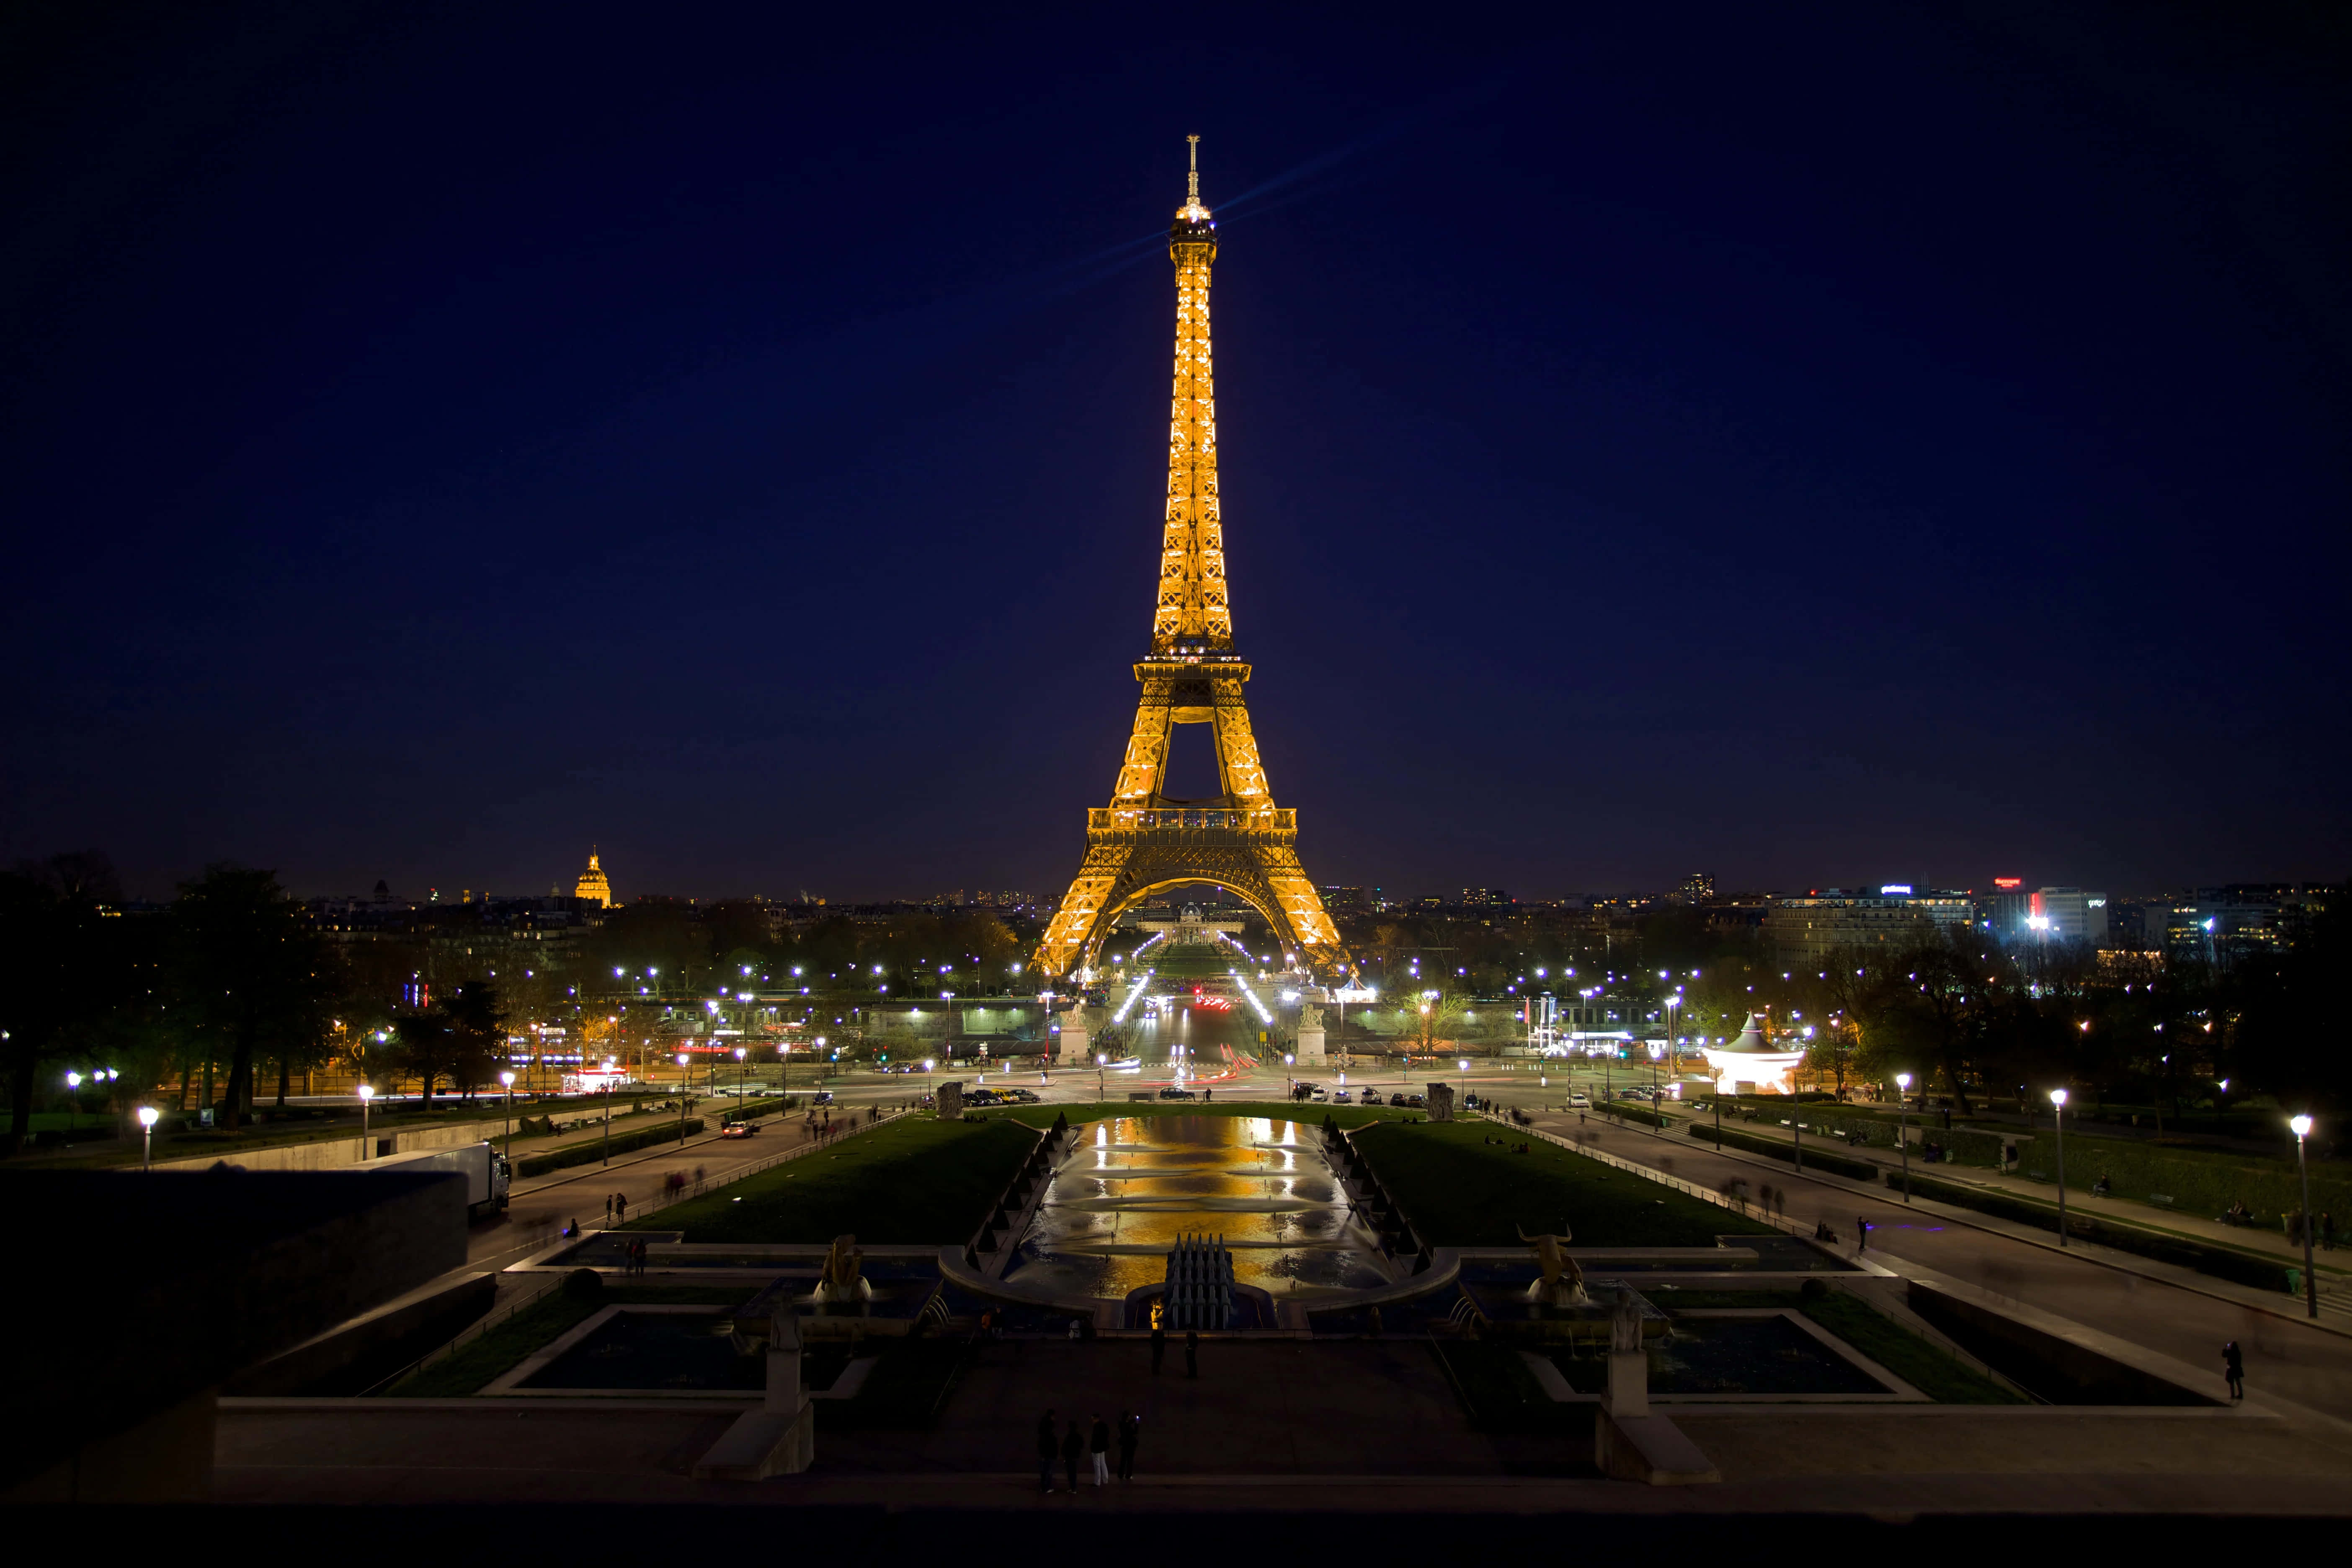 Marvel in the majesty of the Eiffel Tower at night.